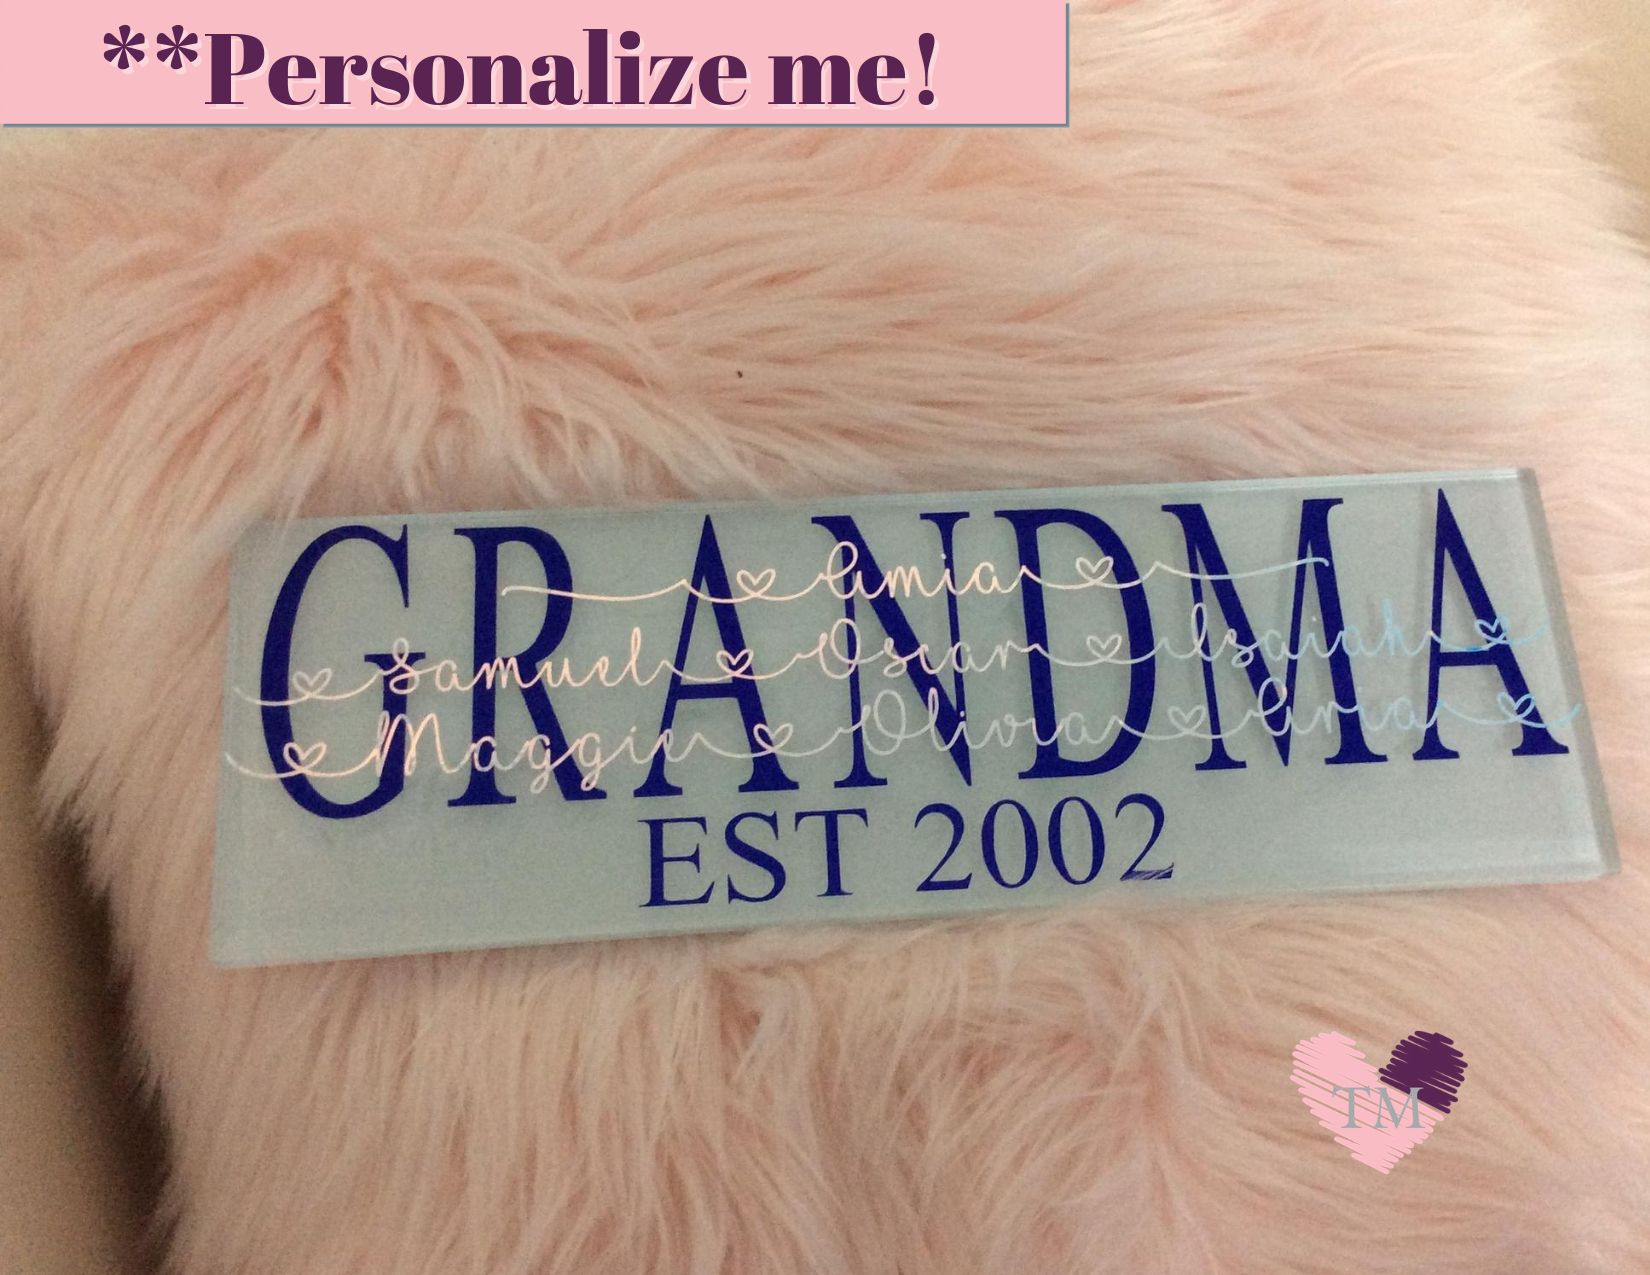 Custom Personalized Glass Gift Tiles (Grandma) - Mother's/Father's Day Gifts